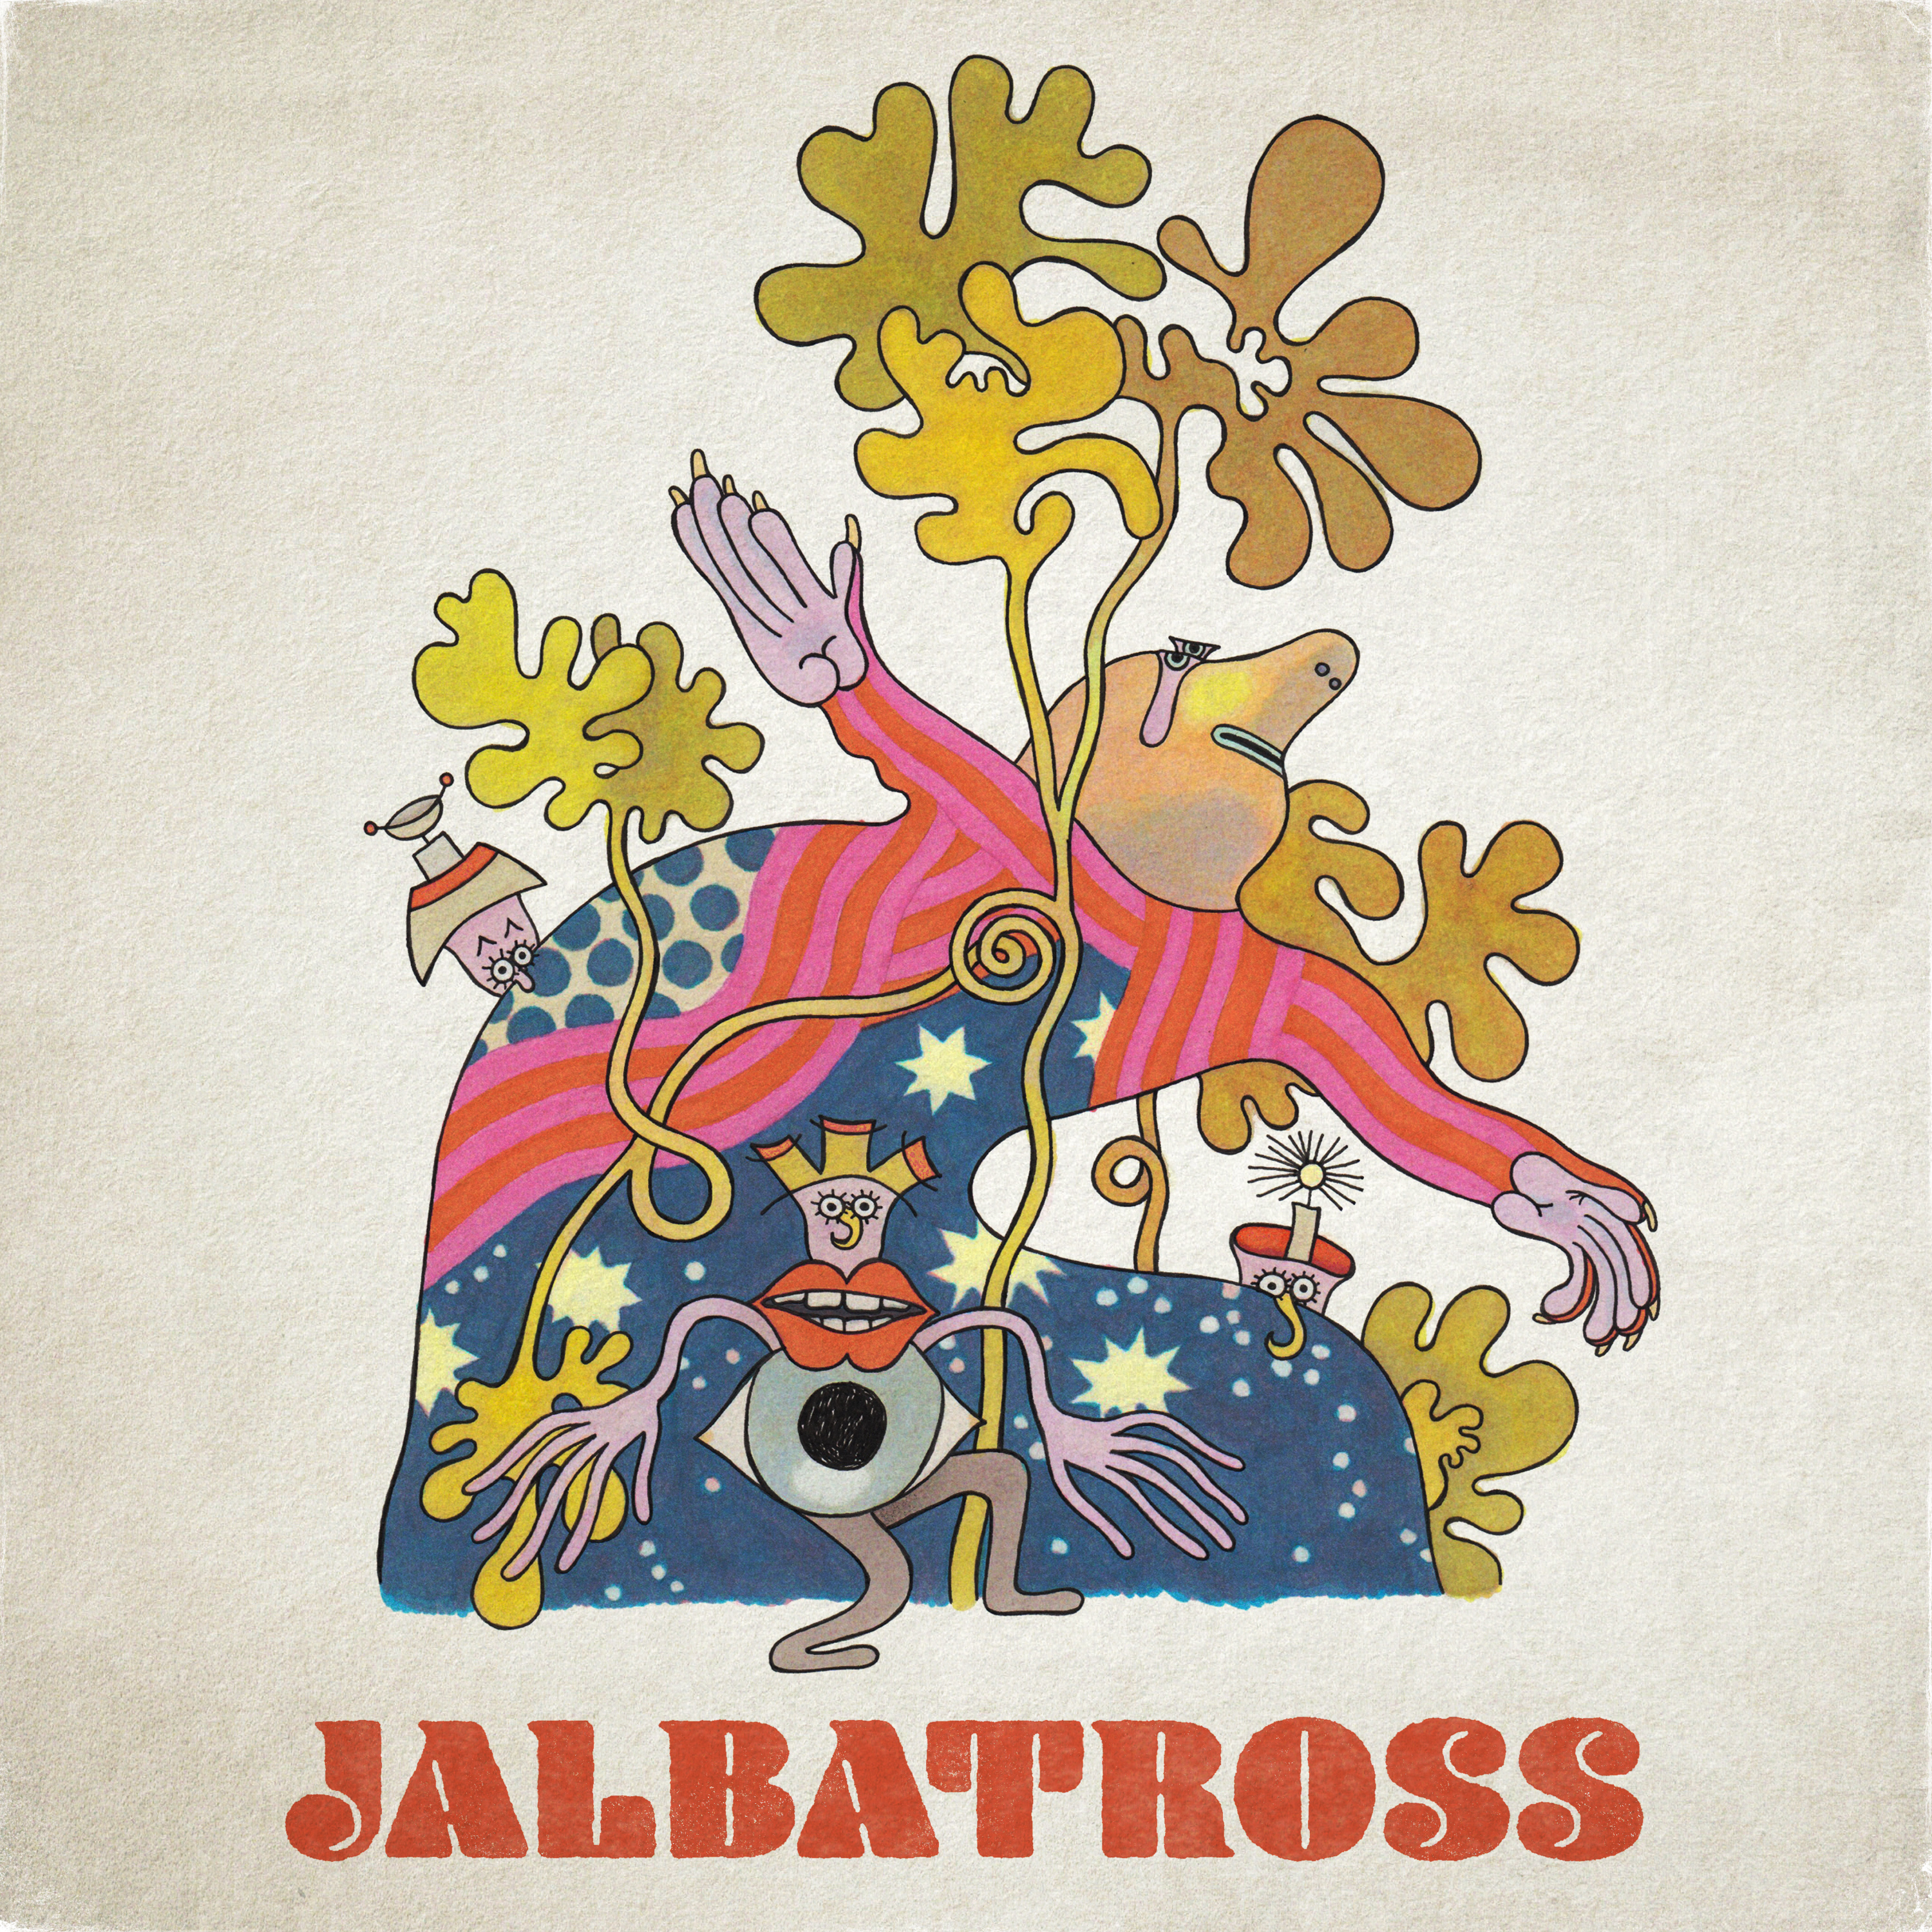 Jalbatross releases debut self-titled 6 song EP